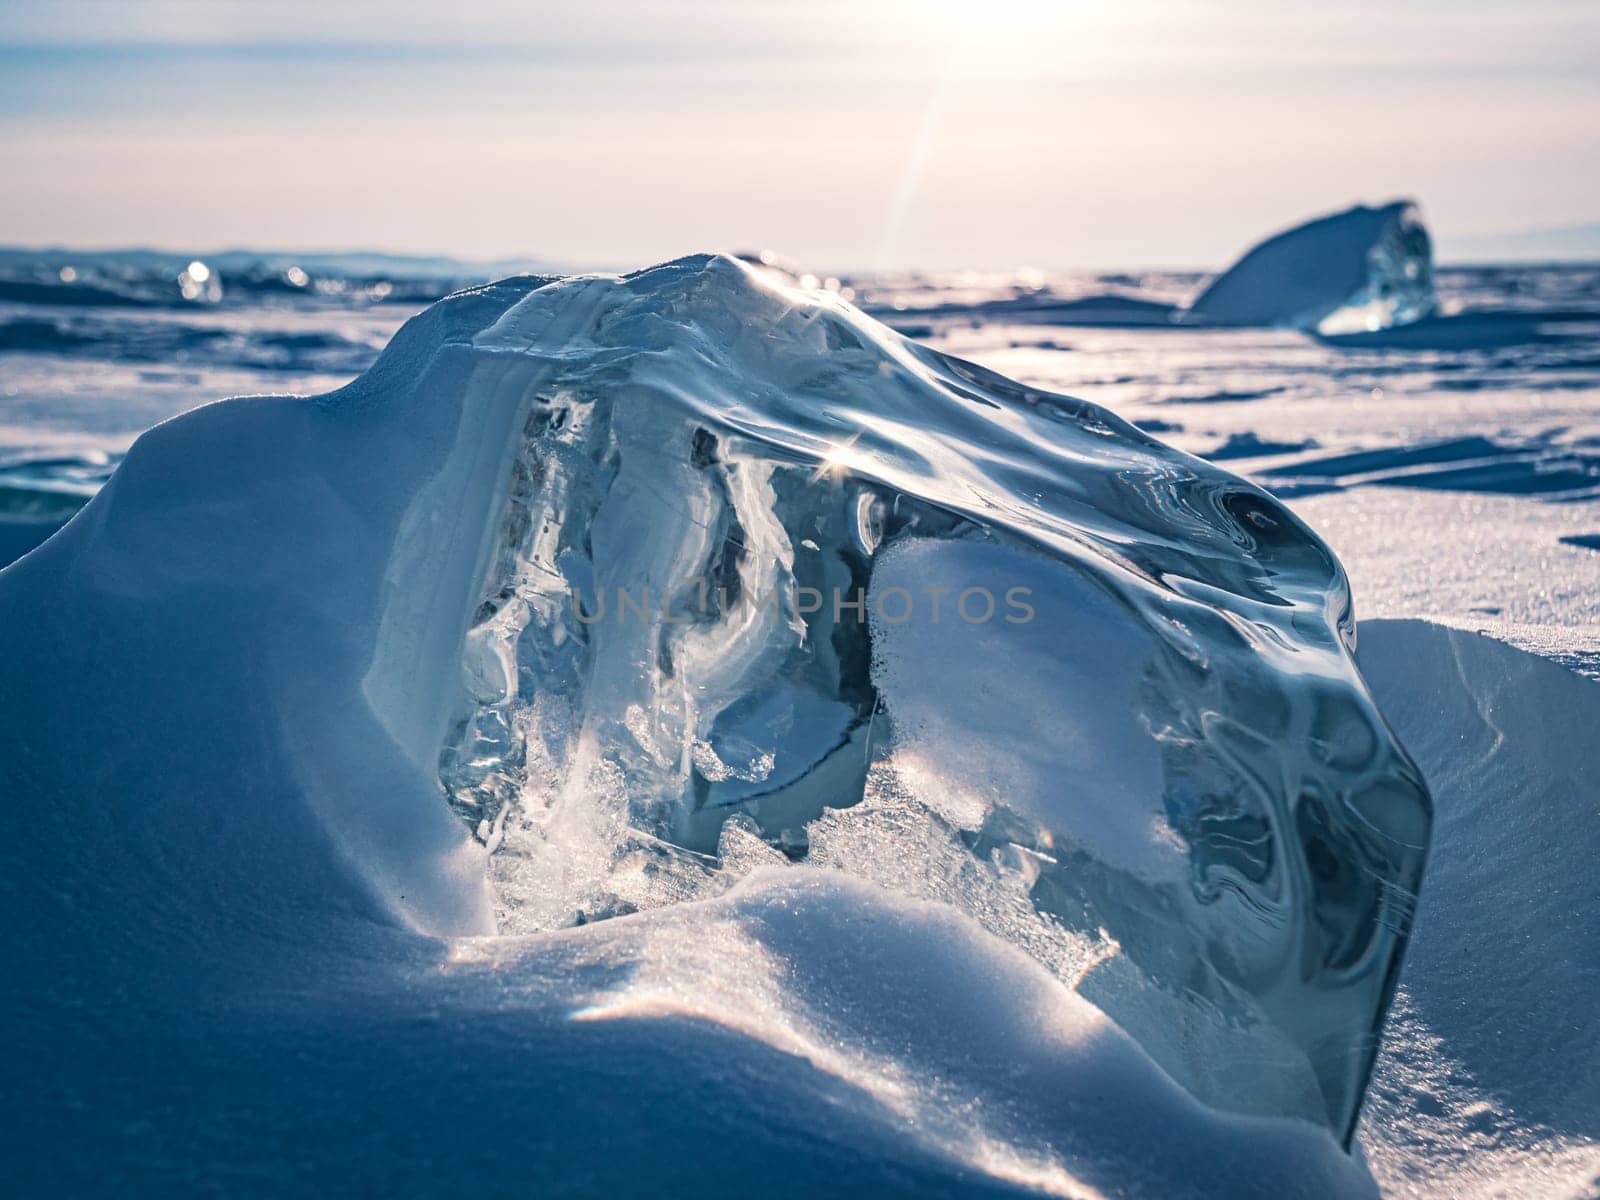 A stunning block of ice sits on the snow, shimmering in the early morning light of a winter sunrise on Lake Baikal, Siberia.